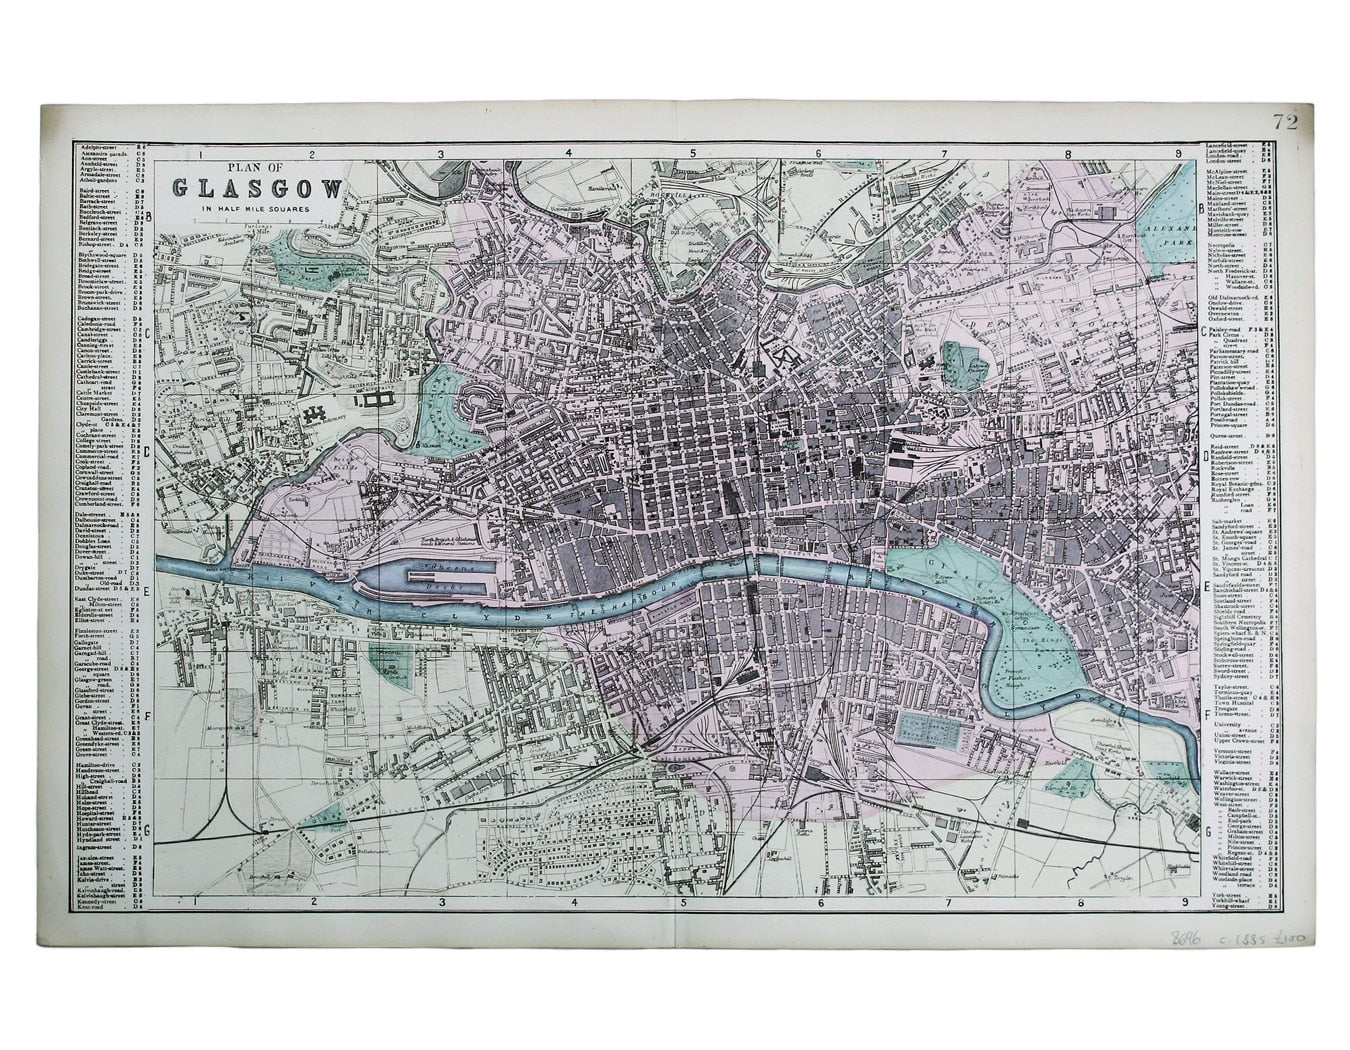 Bacon's Map of Glasgow